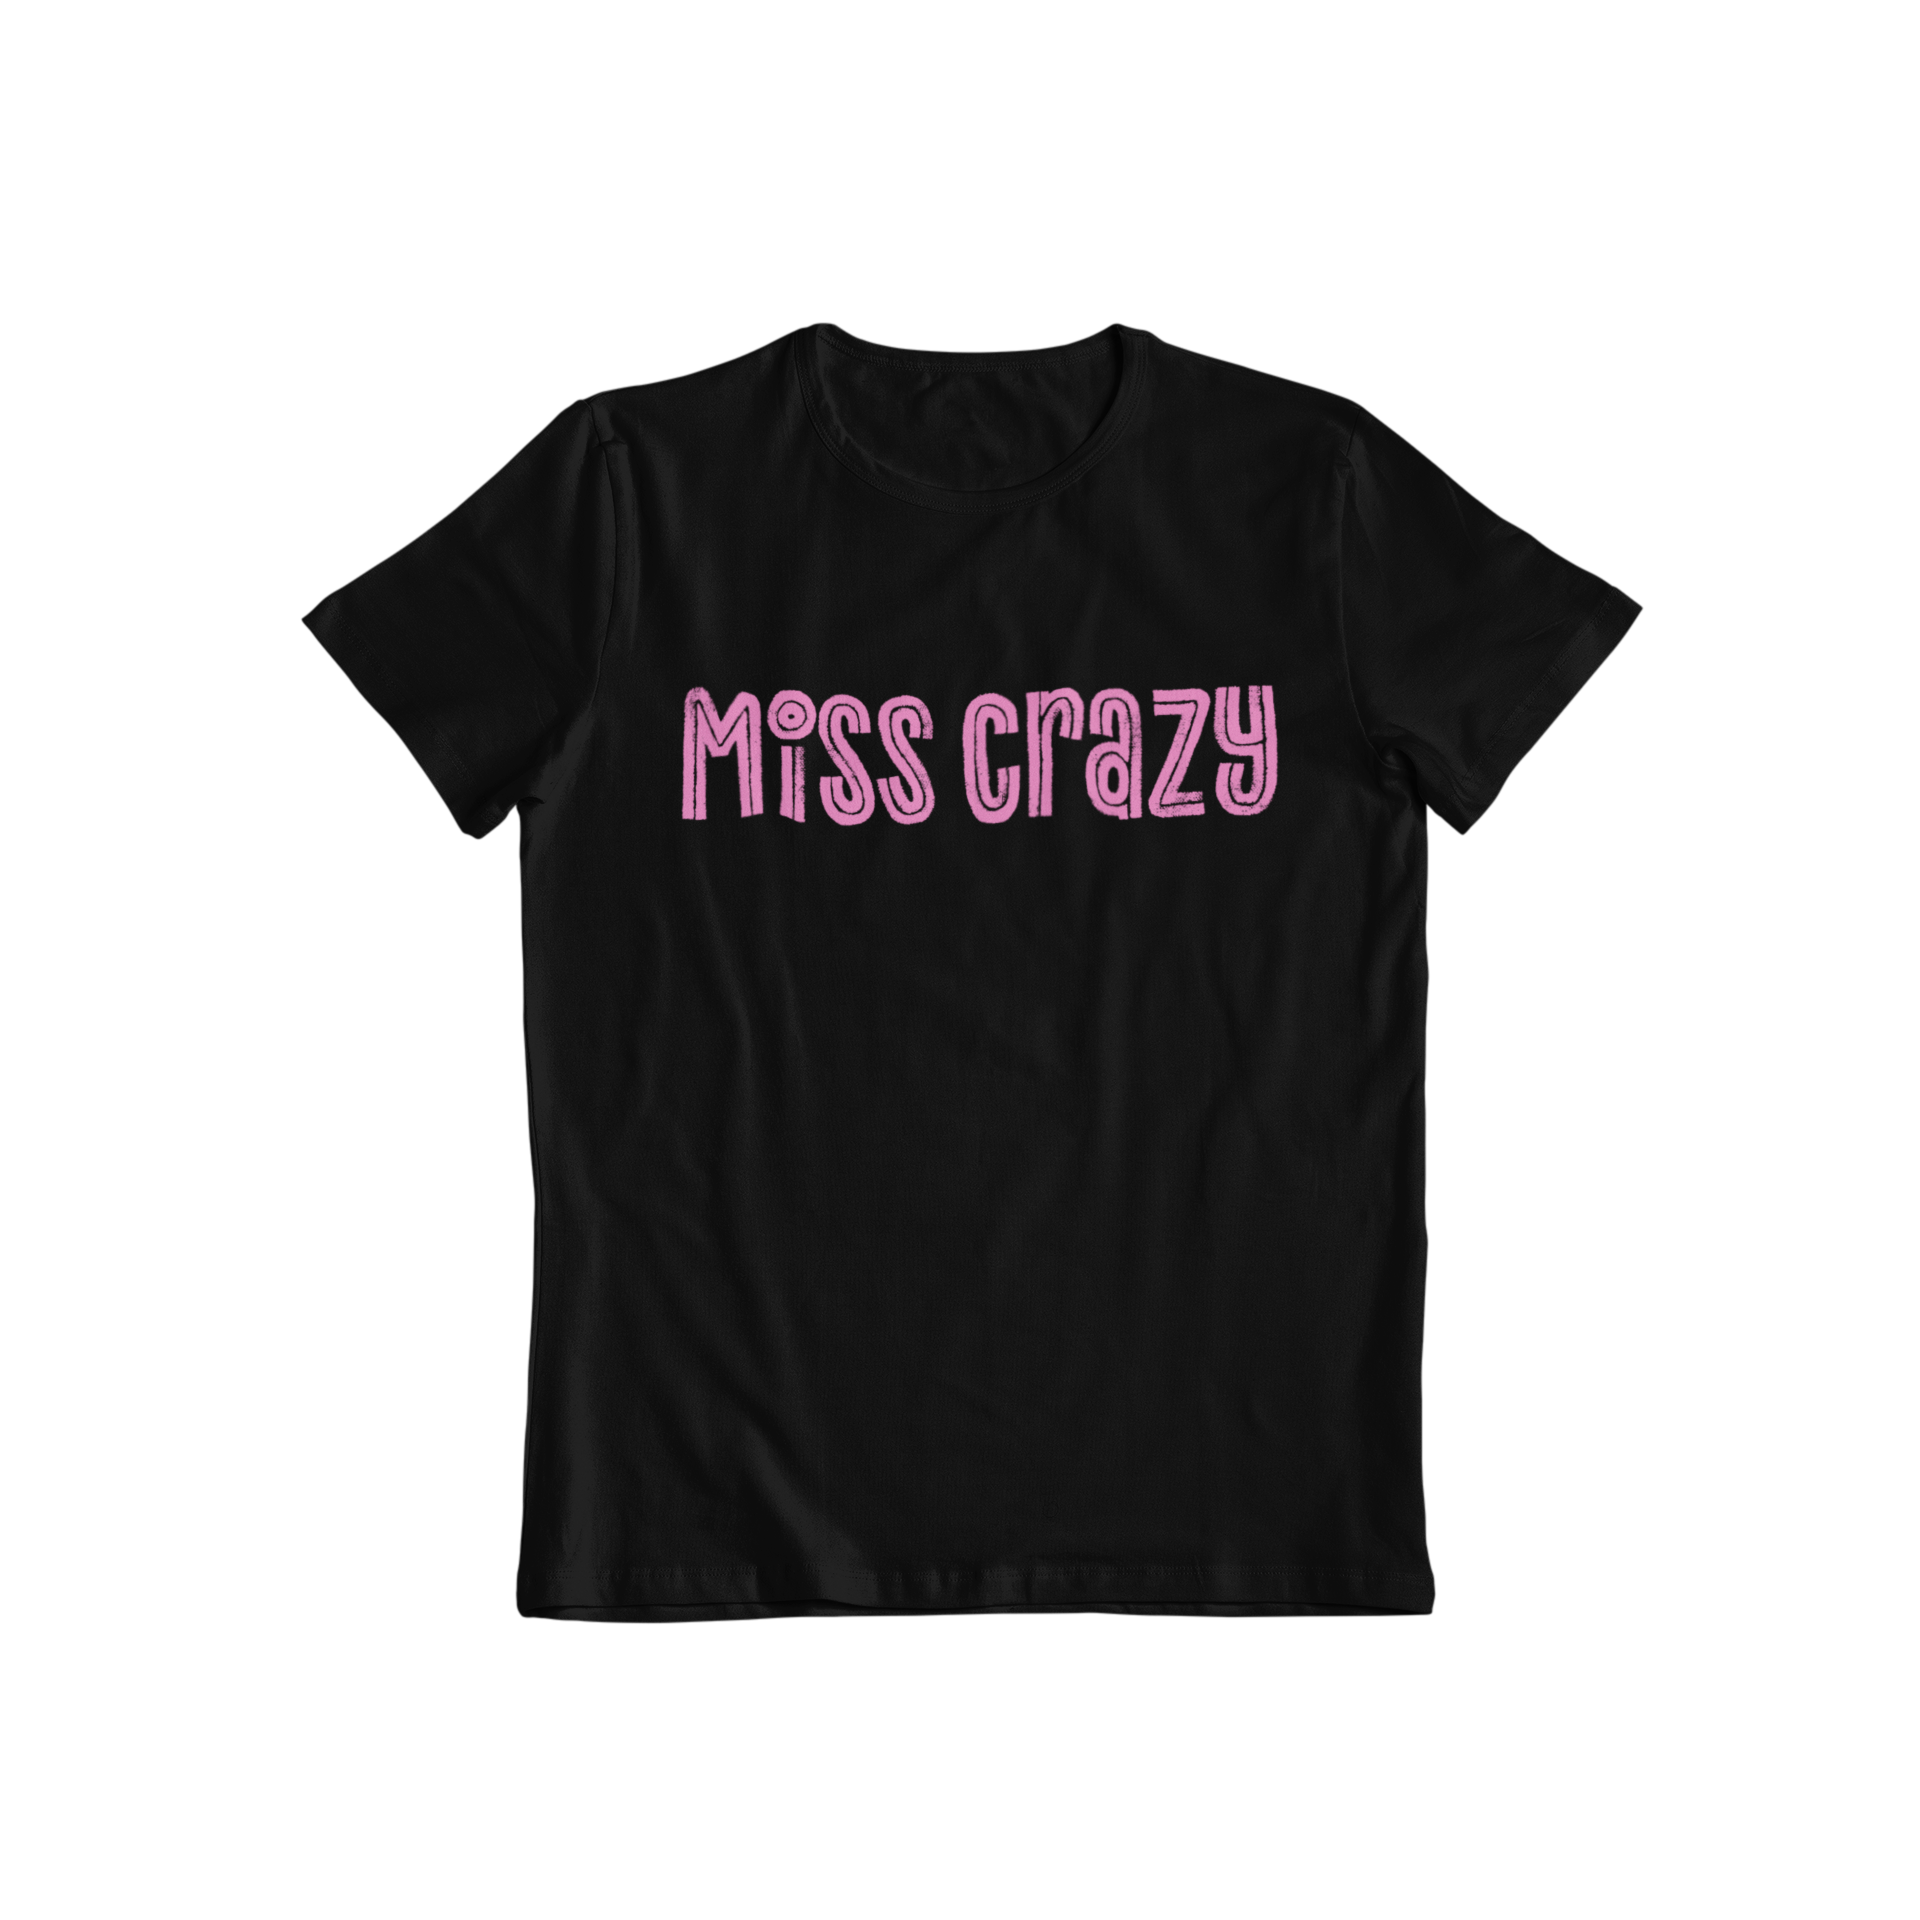 Elevate your wardrobe with our Miss Crazy T-shirt, featuring a matching slogan design with our popular Mr Lazy t-shirt. Stand out from the crowd and show off your playful side with this must-have addition to your closet. Made with high-quality materials for ultimate comfort.